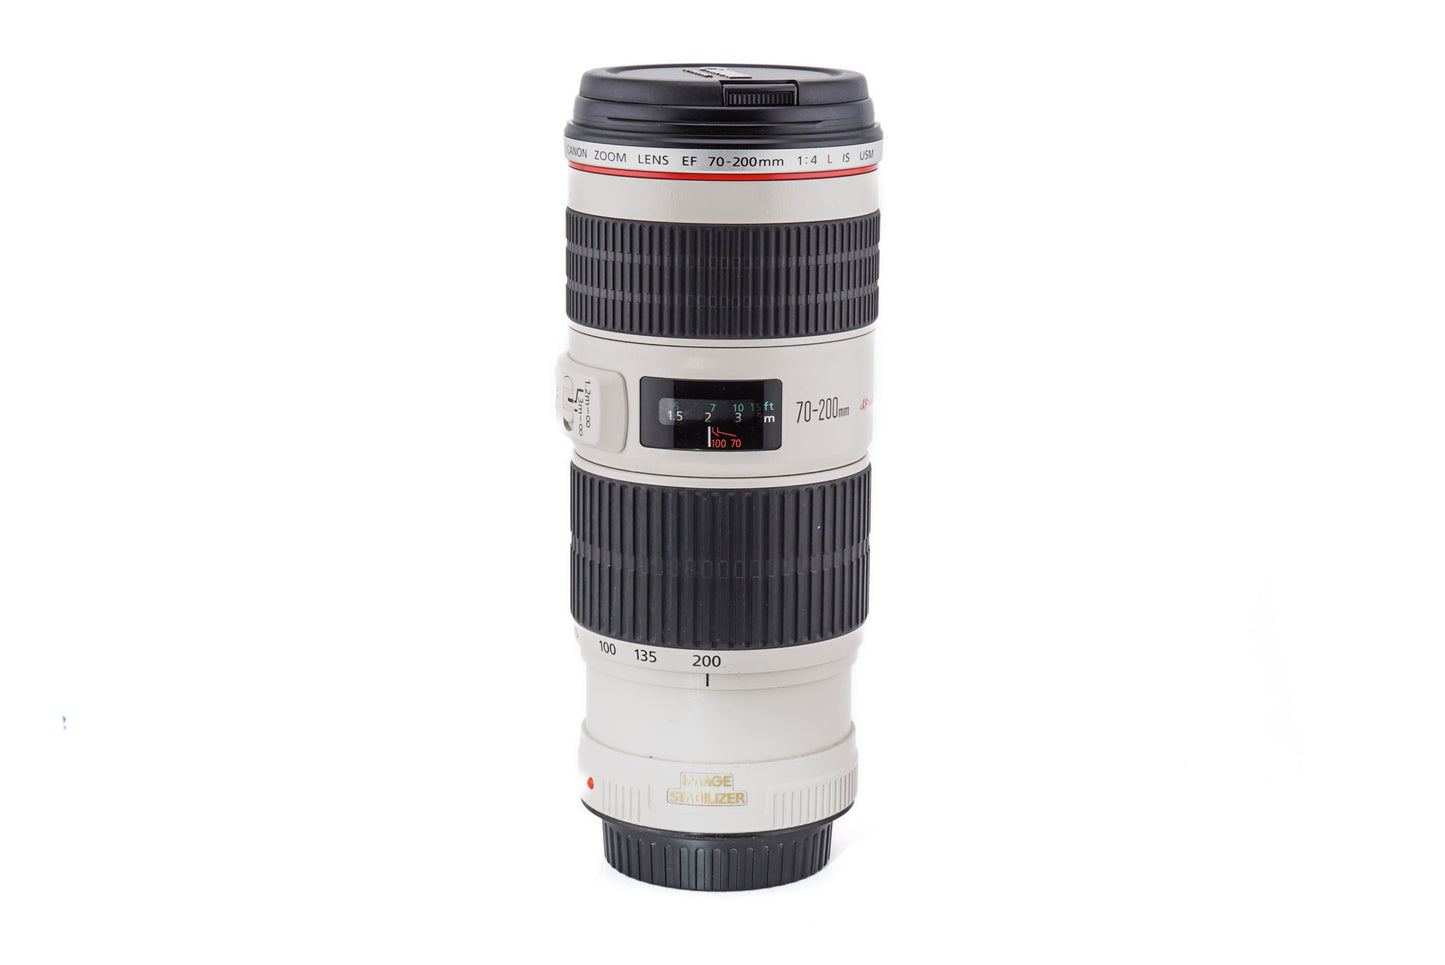 Canon 70-200mm f4 L IS USM - Lens